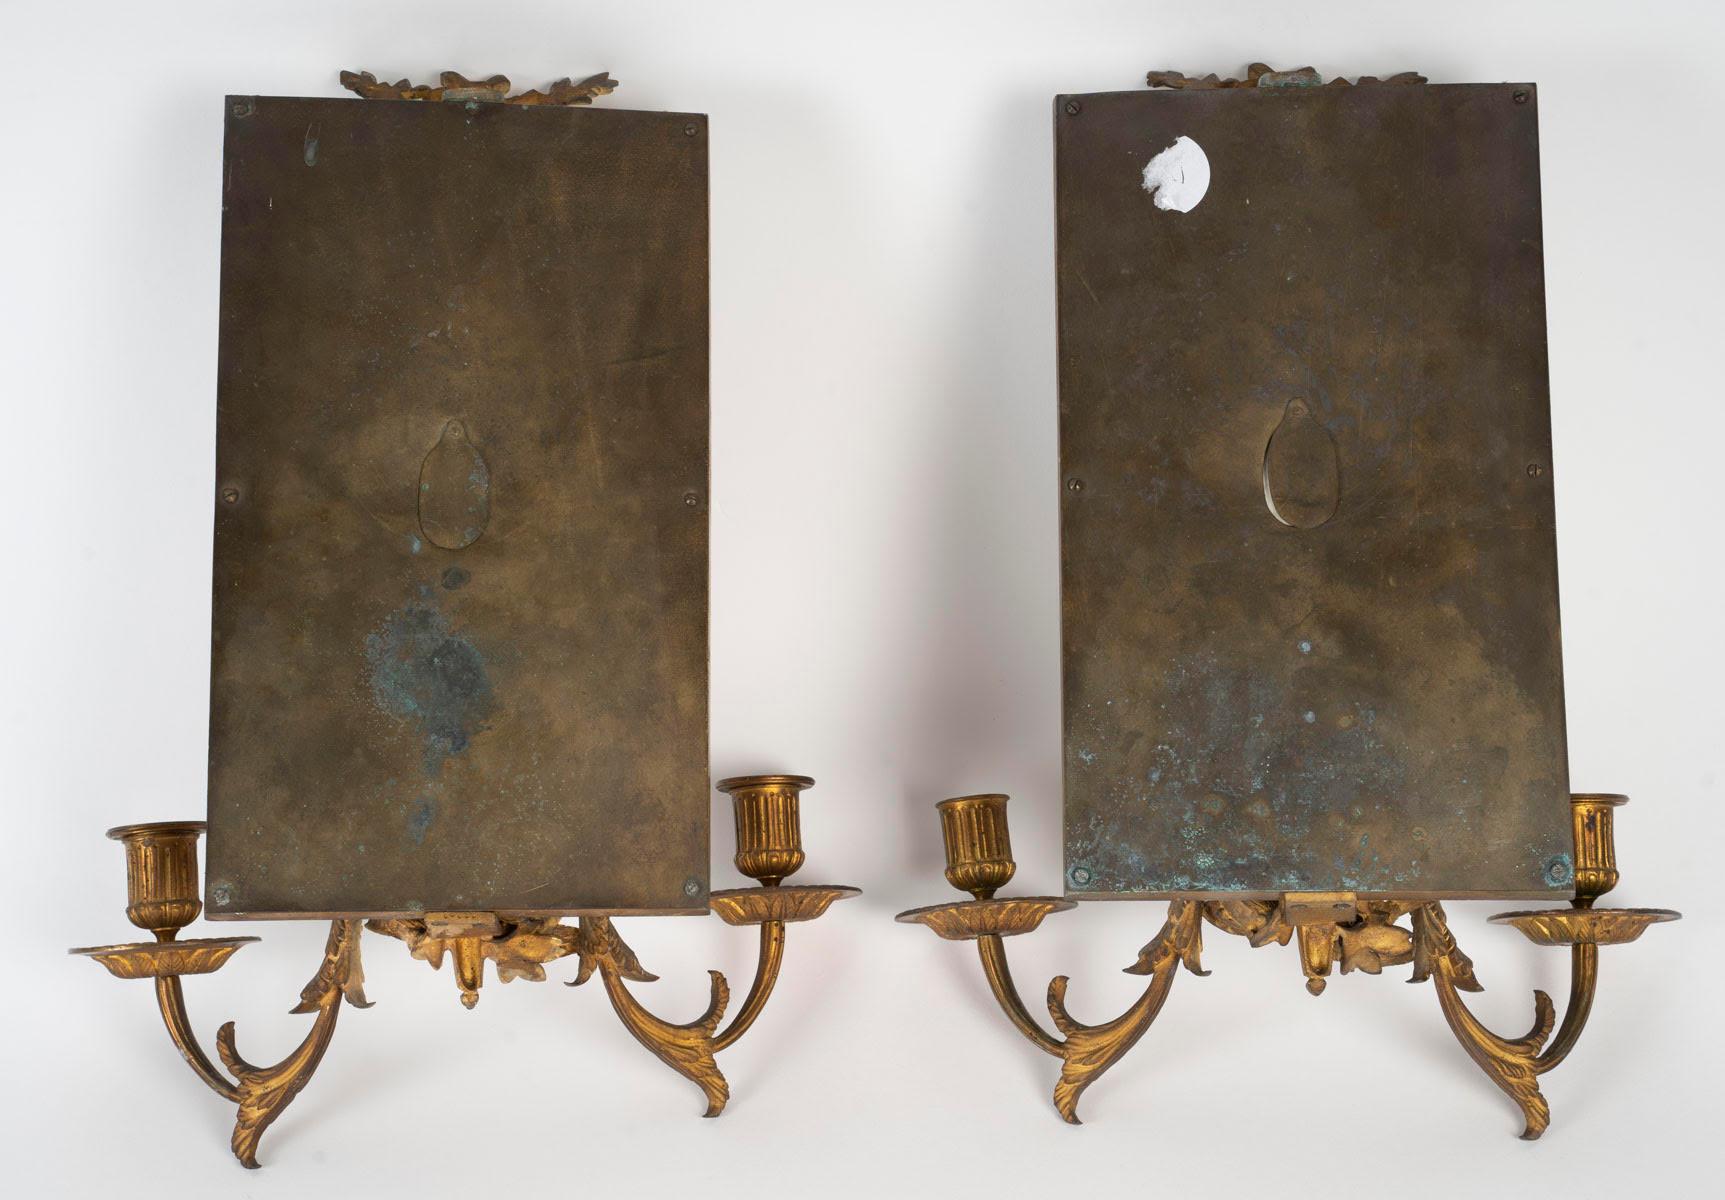 Pair of Wall Sconces in Gilt Bronze and Sèvres Porcelain, Napoleon Period. 2